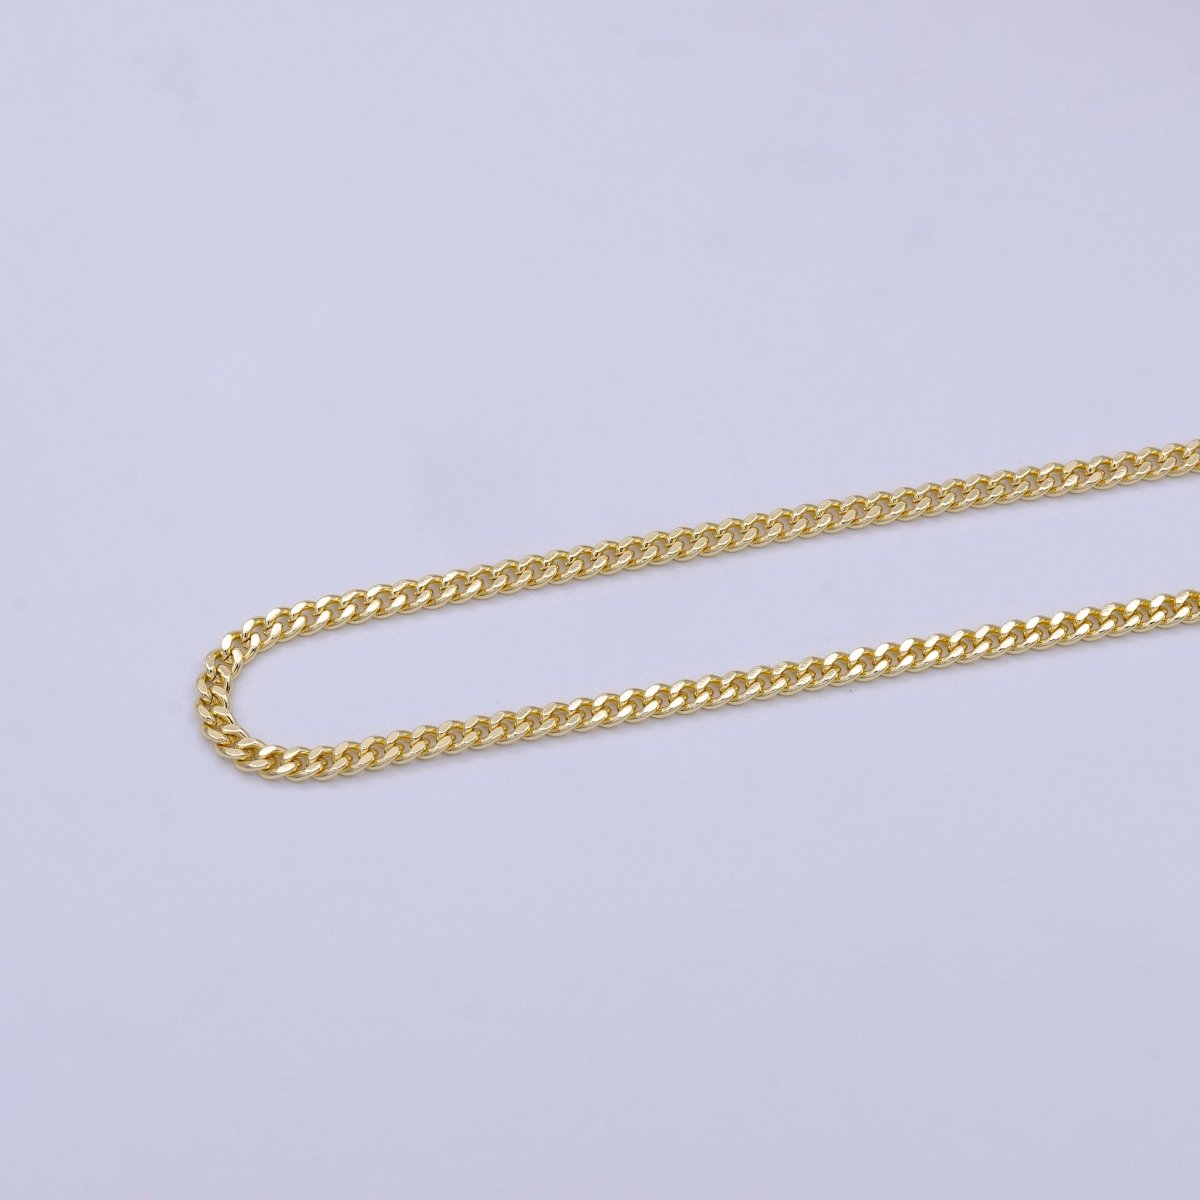 16K Gold Filled Cuban Curb Chain By Yard, Wholesale Bulk Roll Chain for Jewelry Making, Width is 2.2mm Thickness 0.4mm | ROLL-310 - DLUXCA